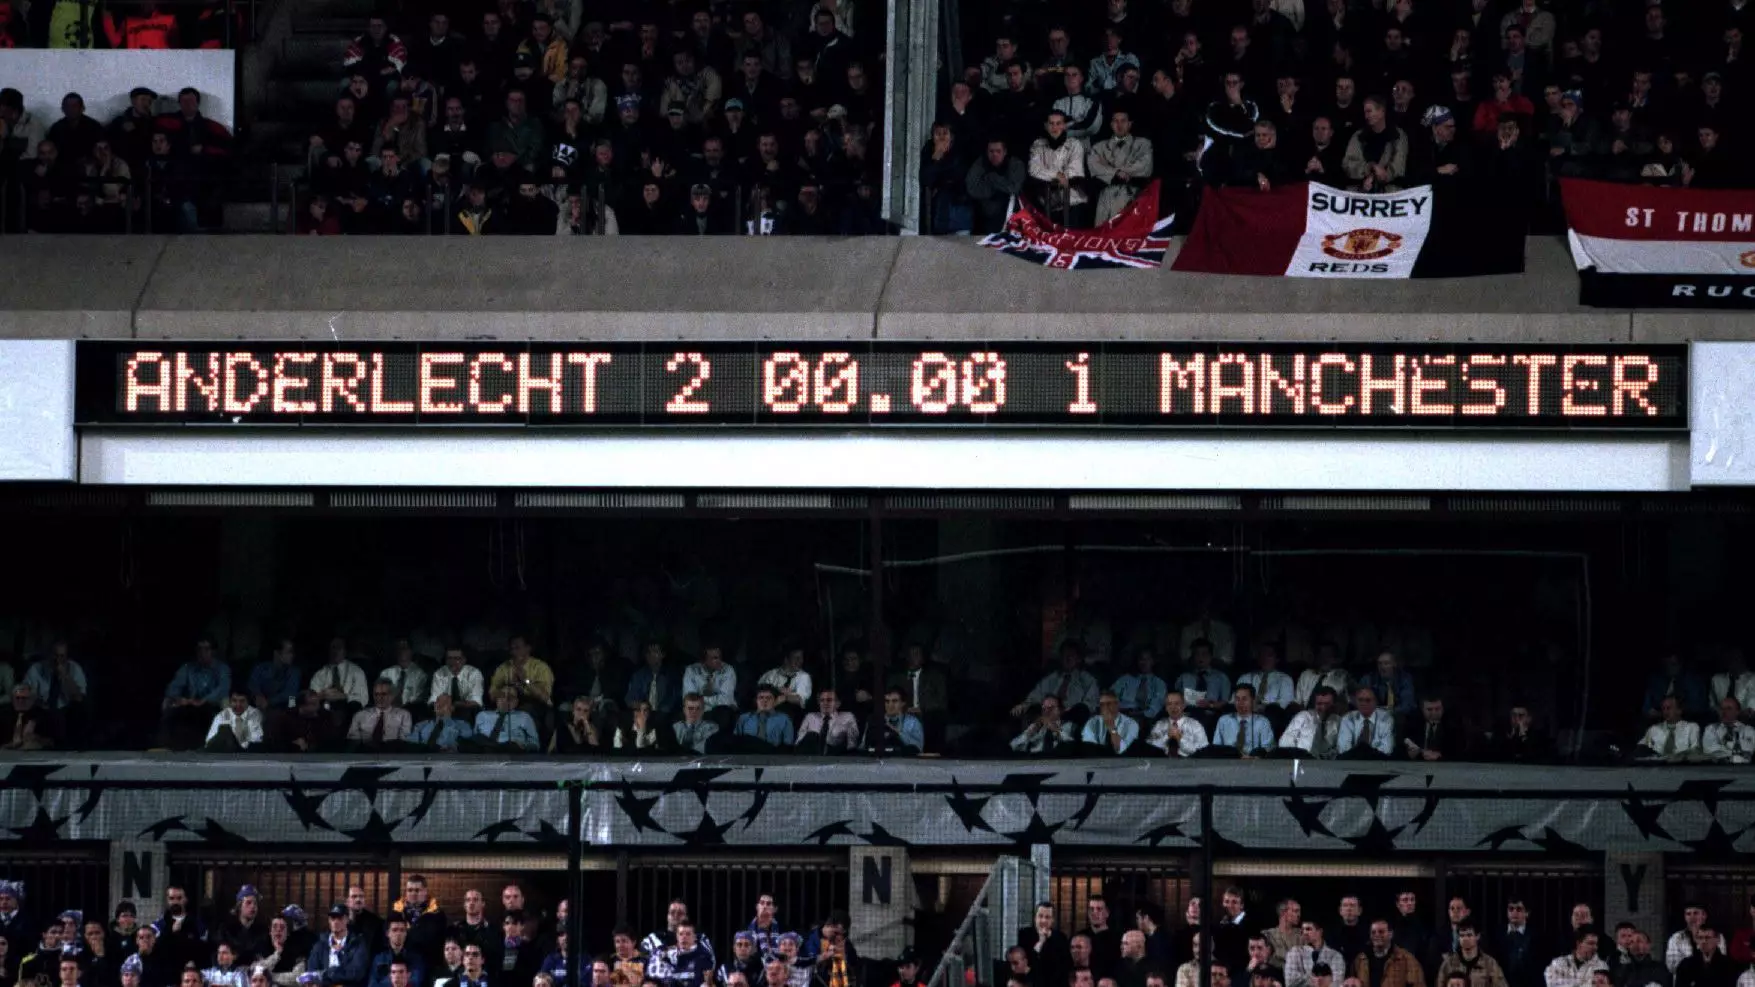 When Manchester United Played Anderlecht Last Time They Lost 2-1